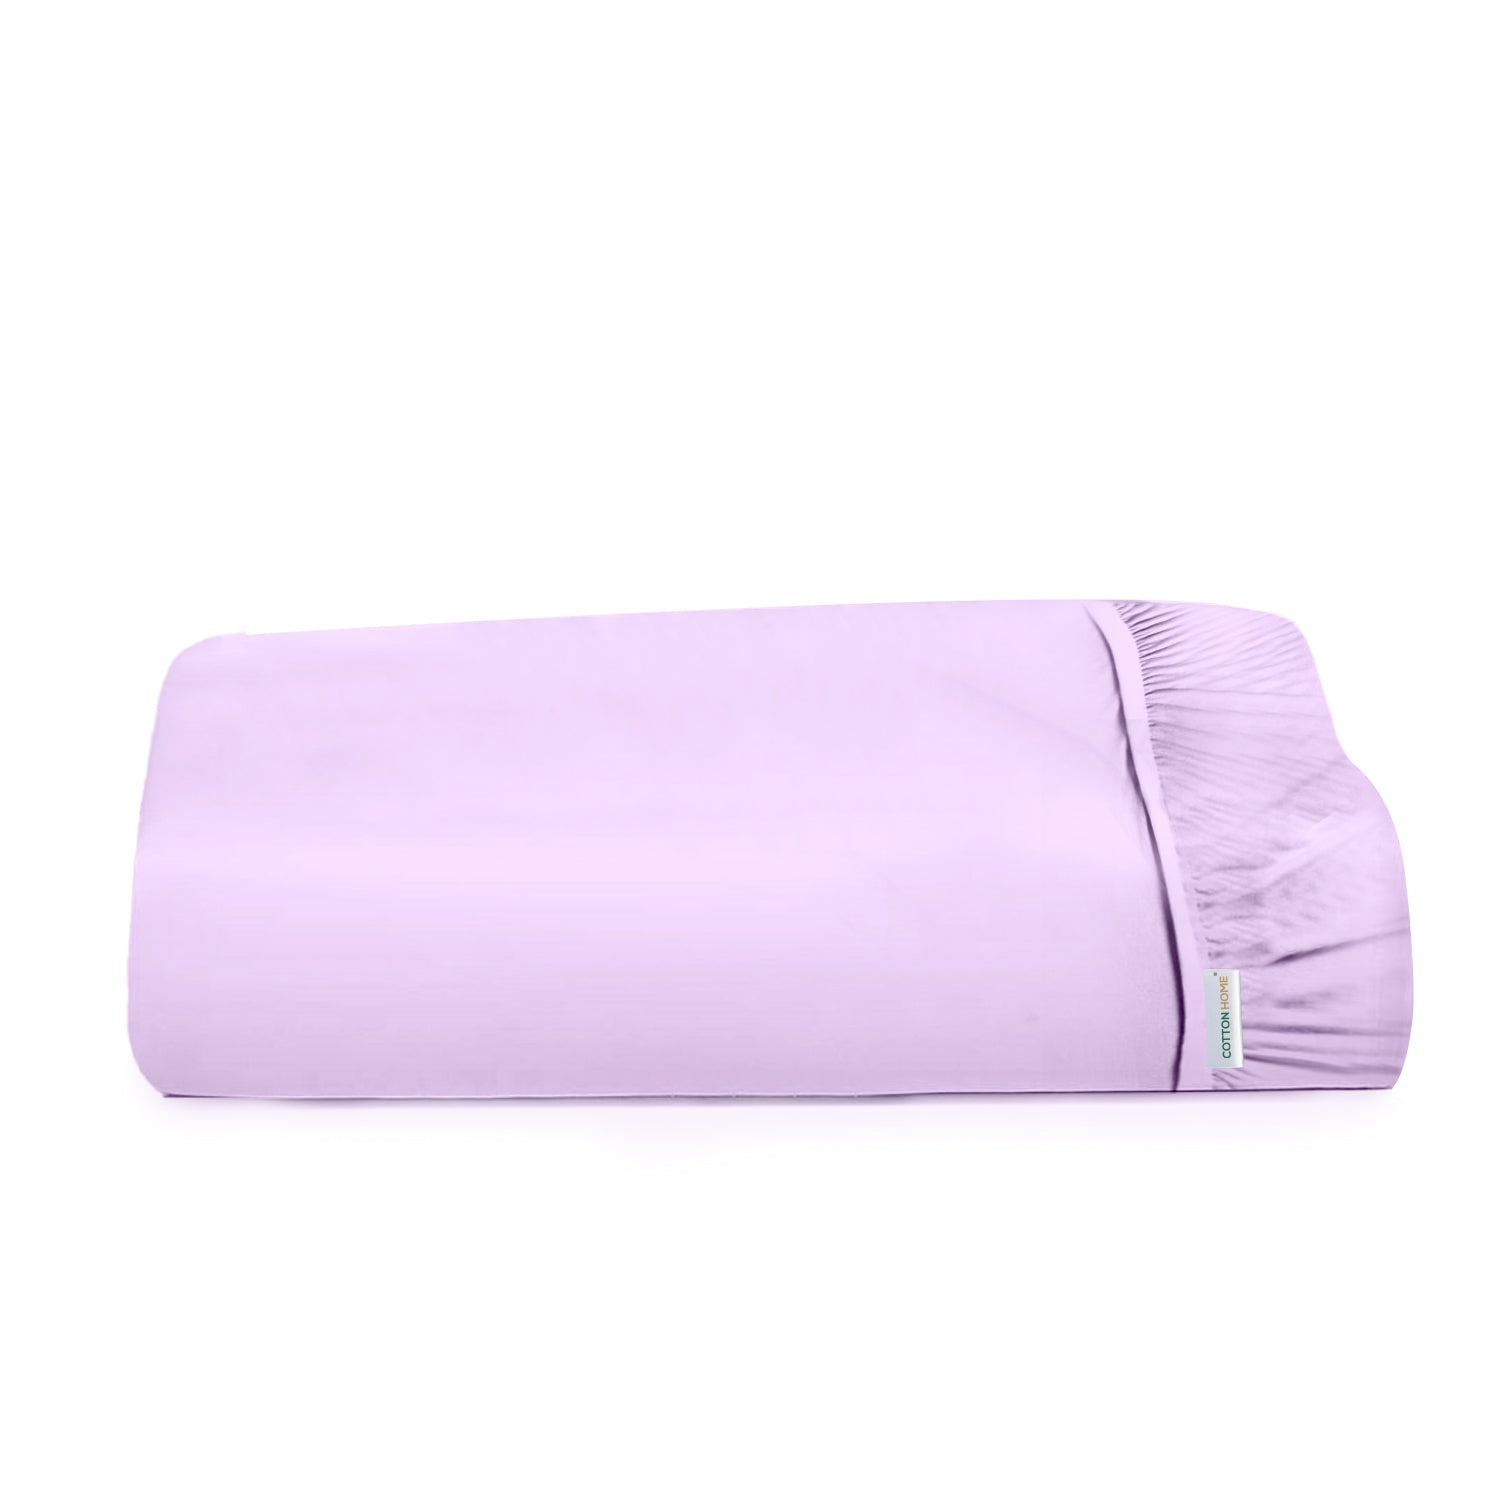 Super Soft Fitted sheet 200x200+30cm - Lilac